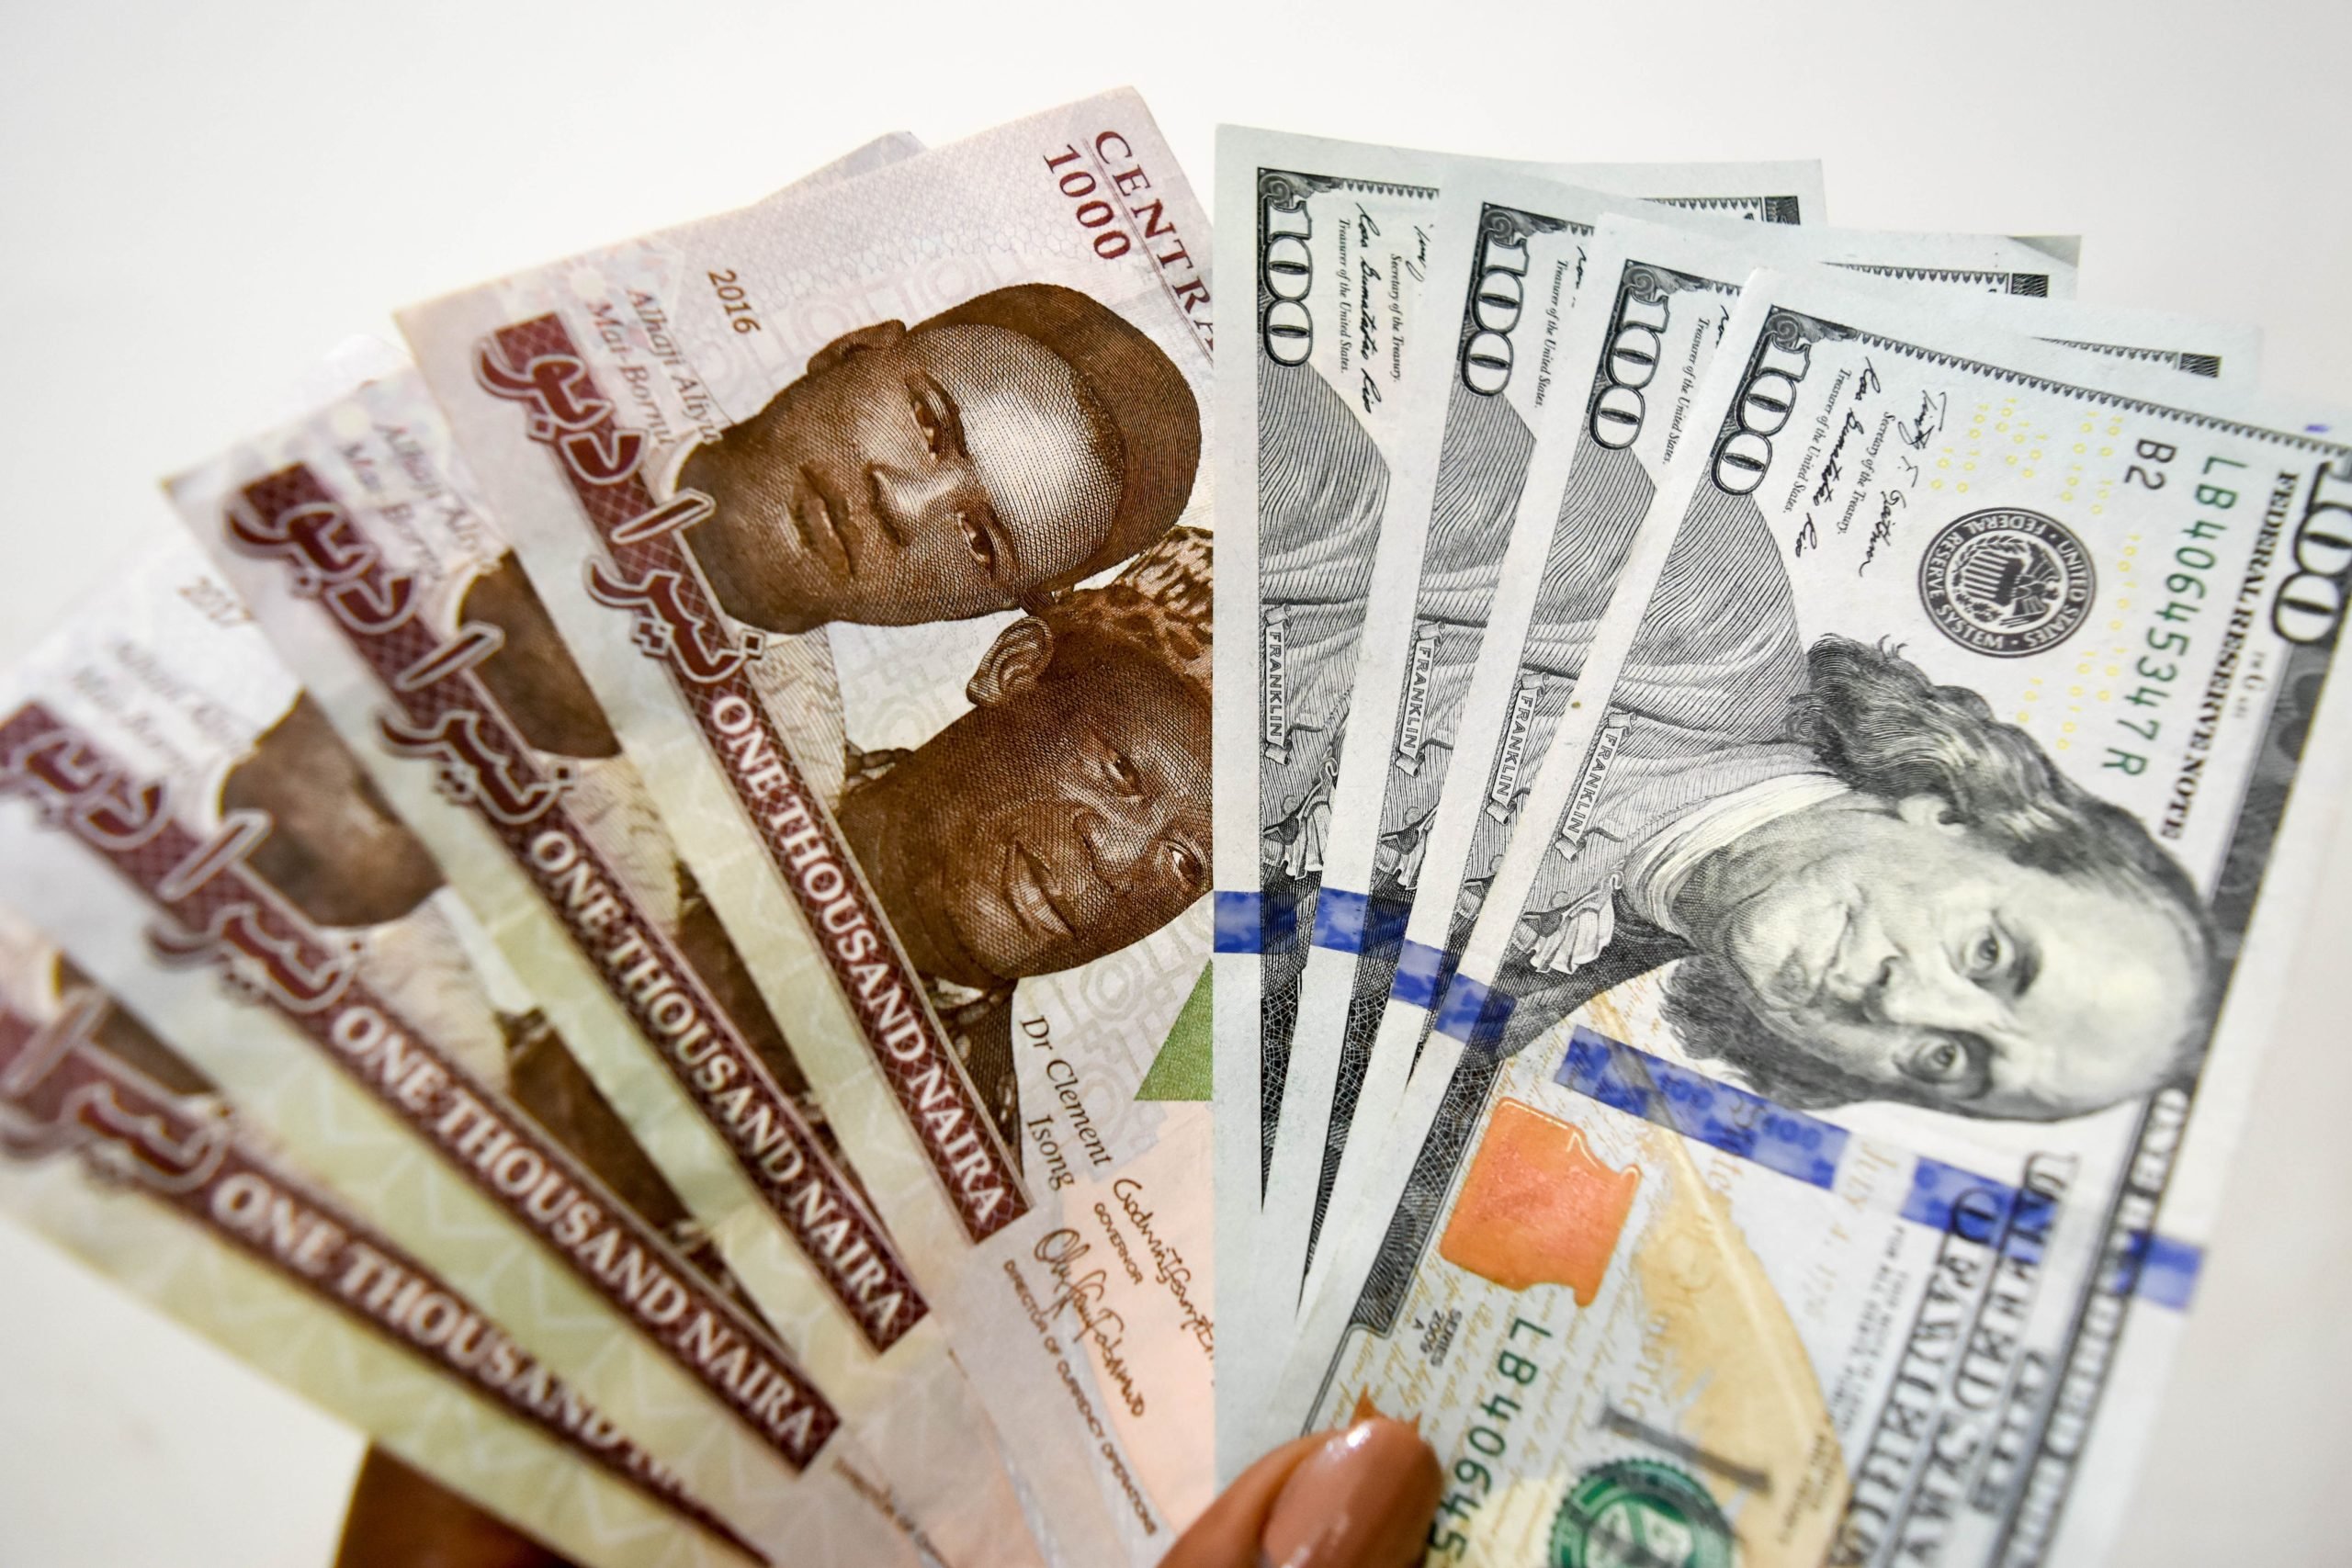 Nigerian Currency Reverses Early April Gains, Depreciating by 12% in Seven Days – Africa Bitcoin News – Bitcoin.com News